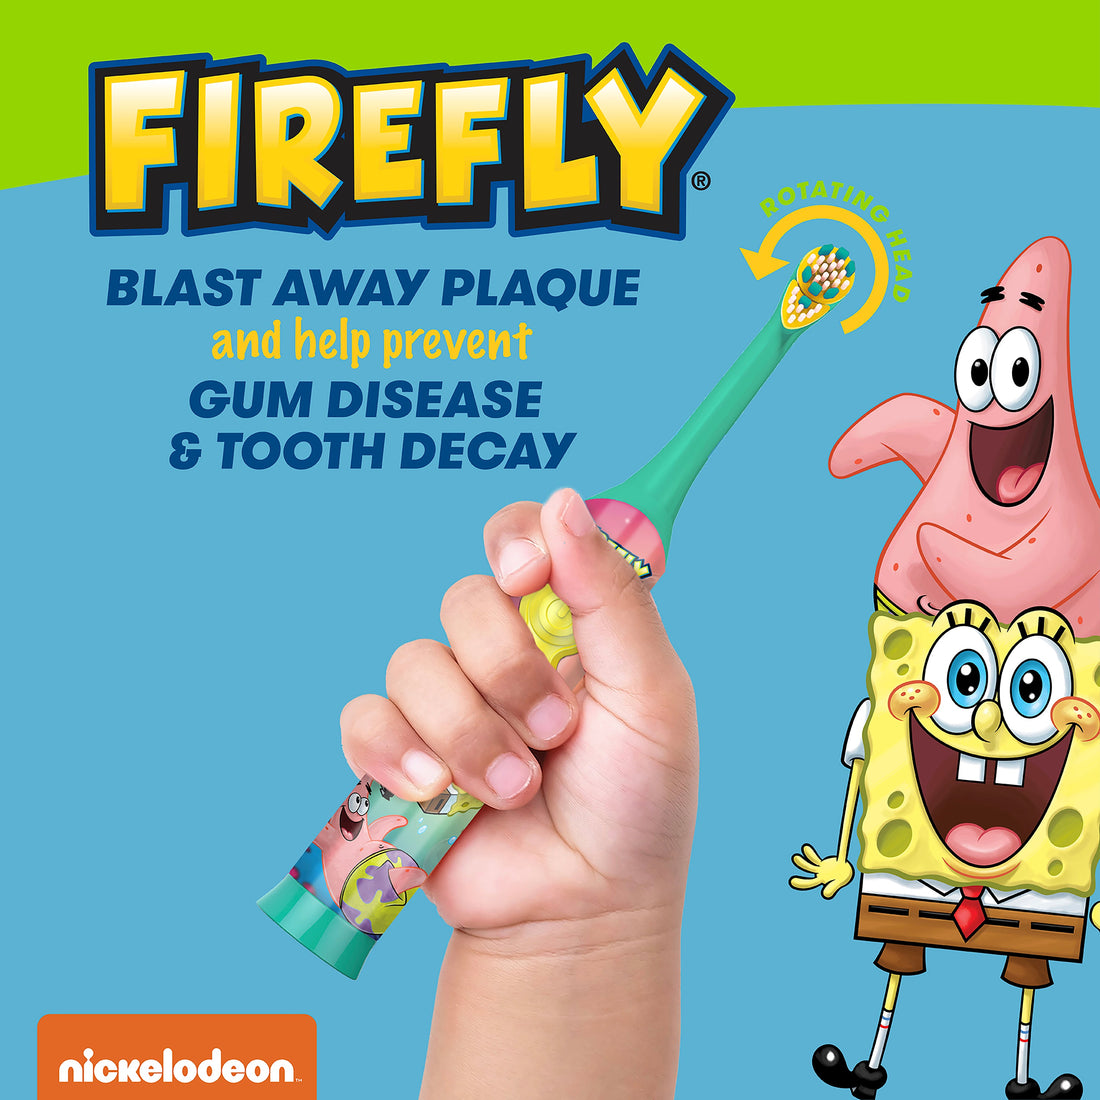  Child holding Firefly Clean N&